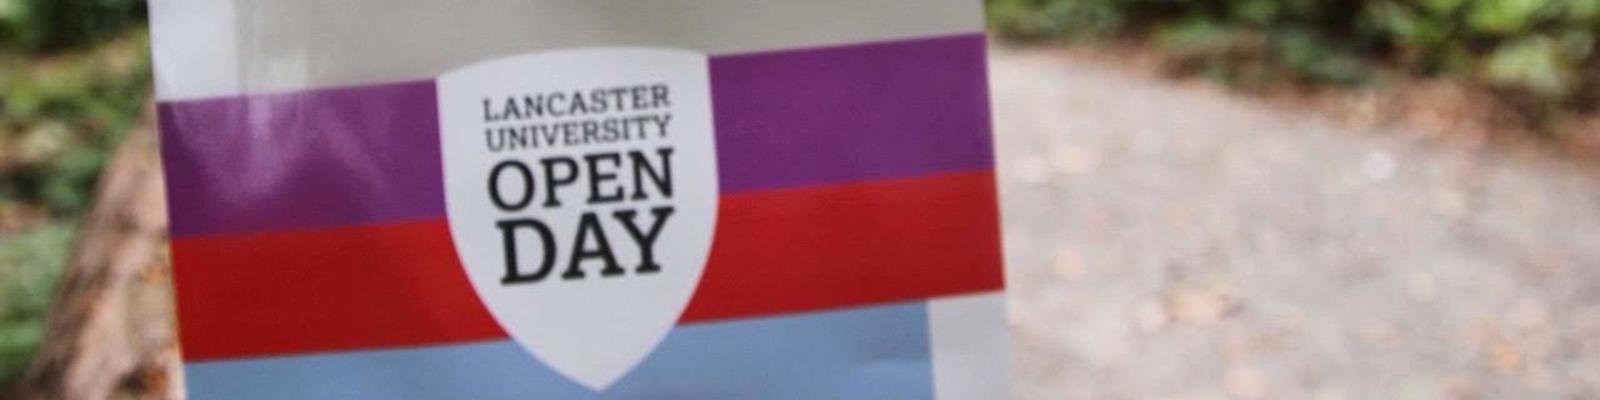 Open day banner 